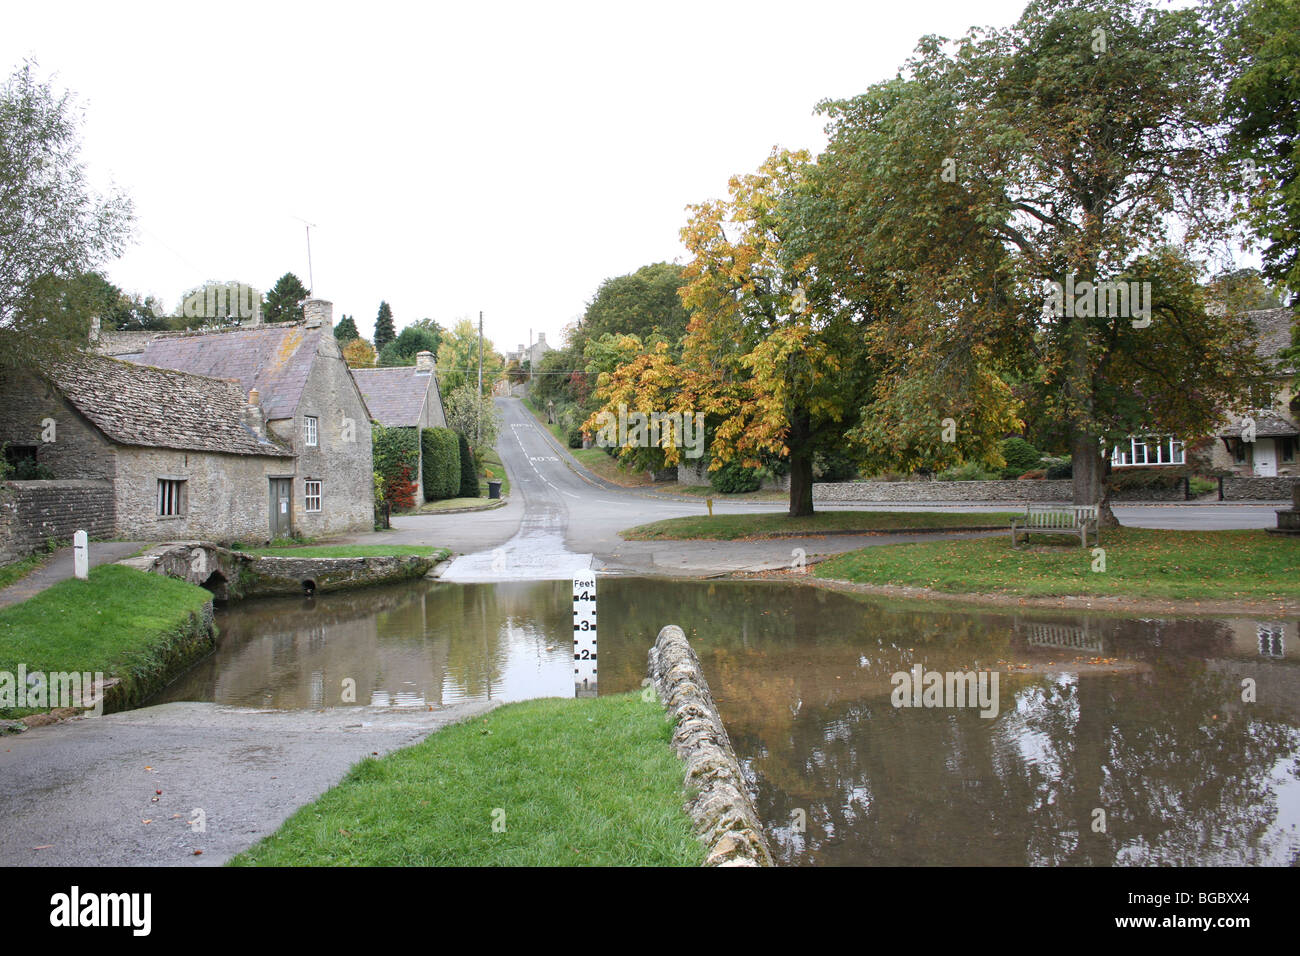 A ford at the village of Shilton in Oxfordshire. Stock Photo